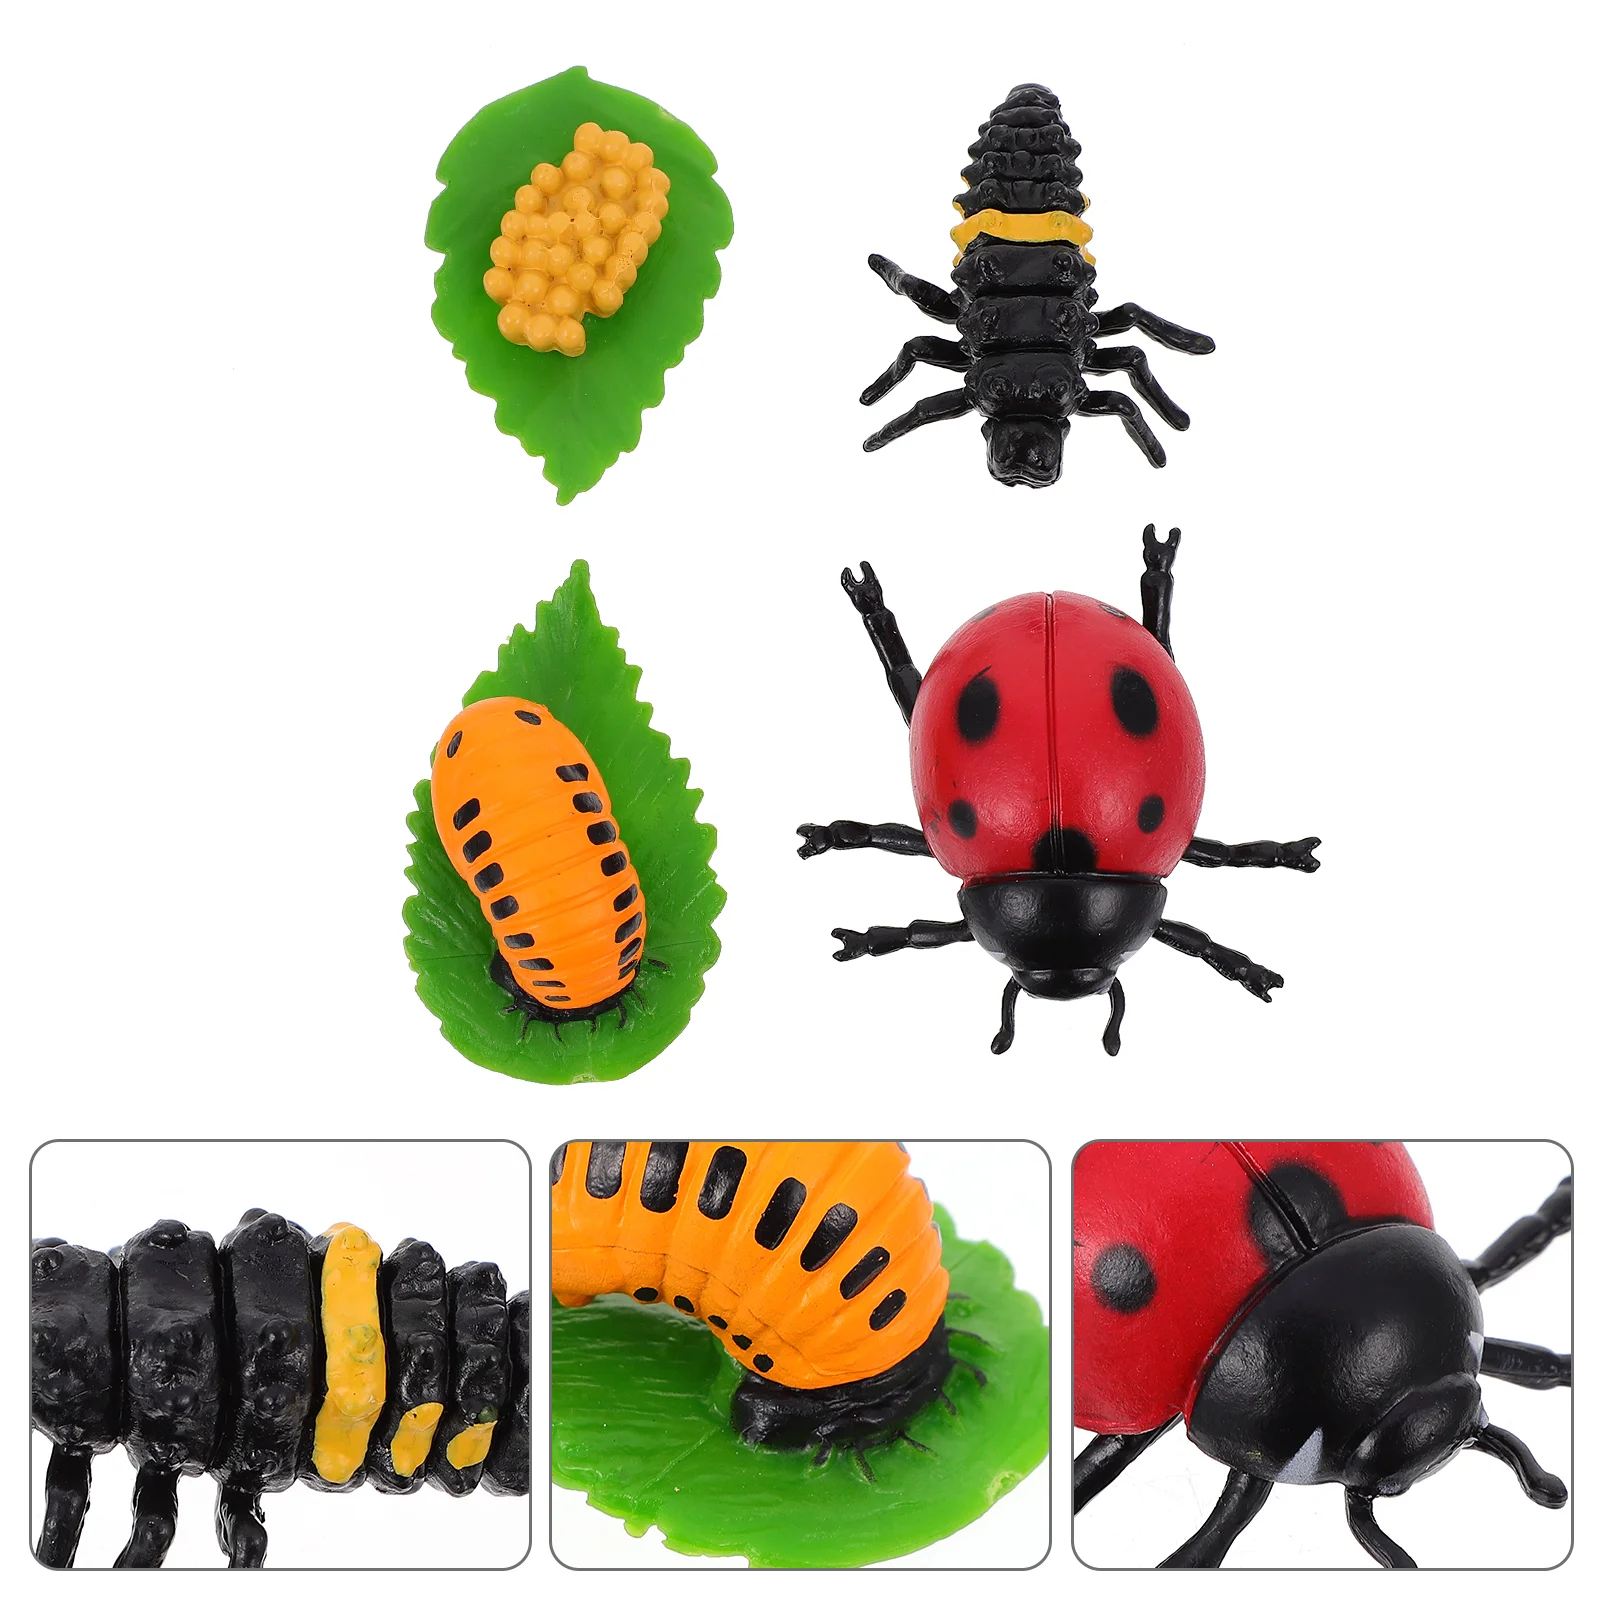 

4 Pcs Ladybug Growth Ornaments Cycle Toy Insect Statue Turtle Gifts Decor Figurines Miniatures Kids Teaching Aids Life